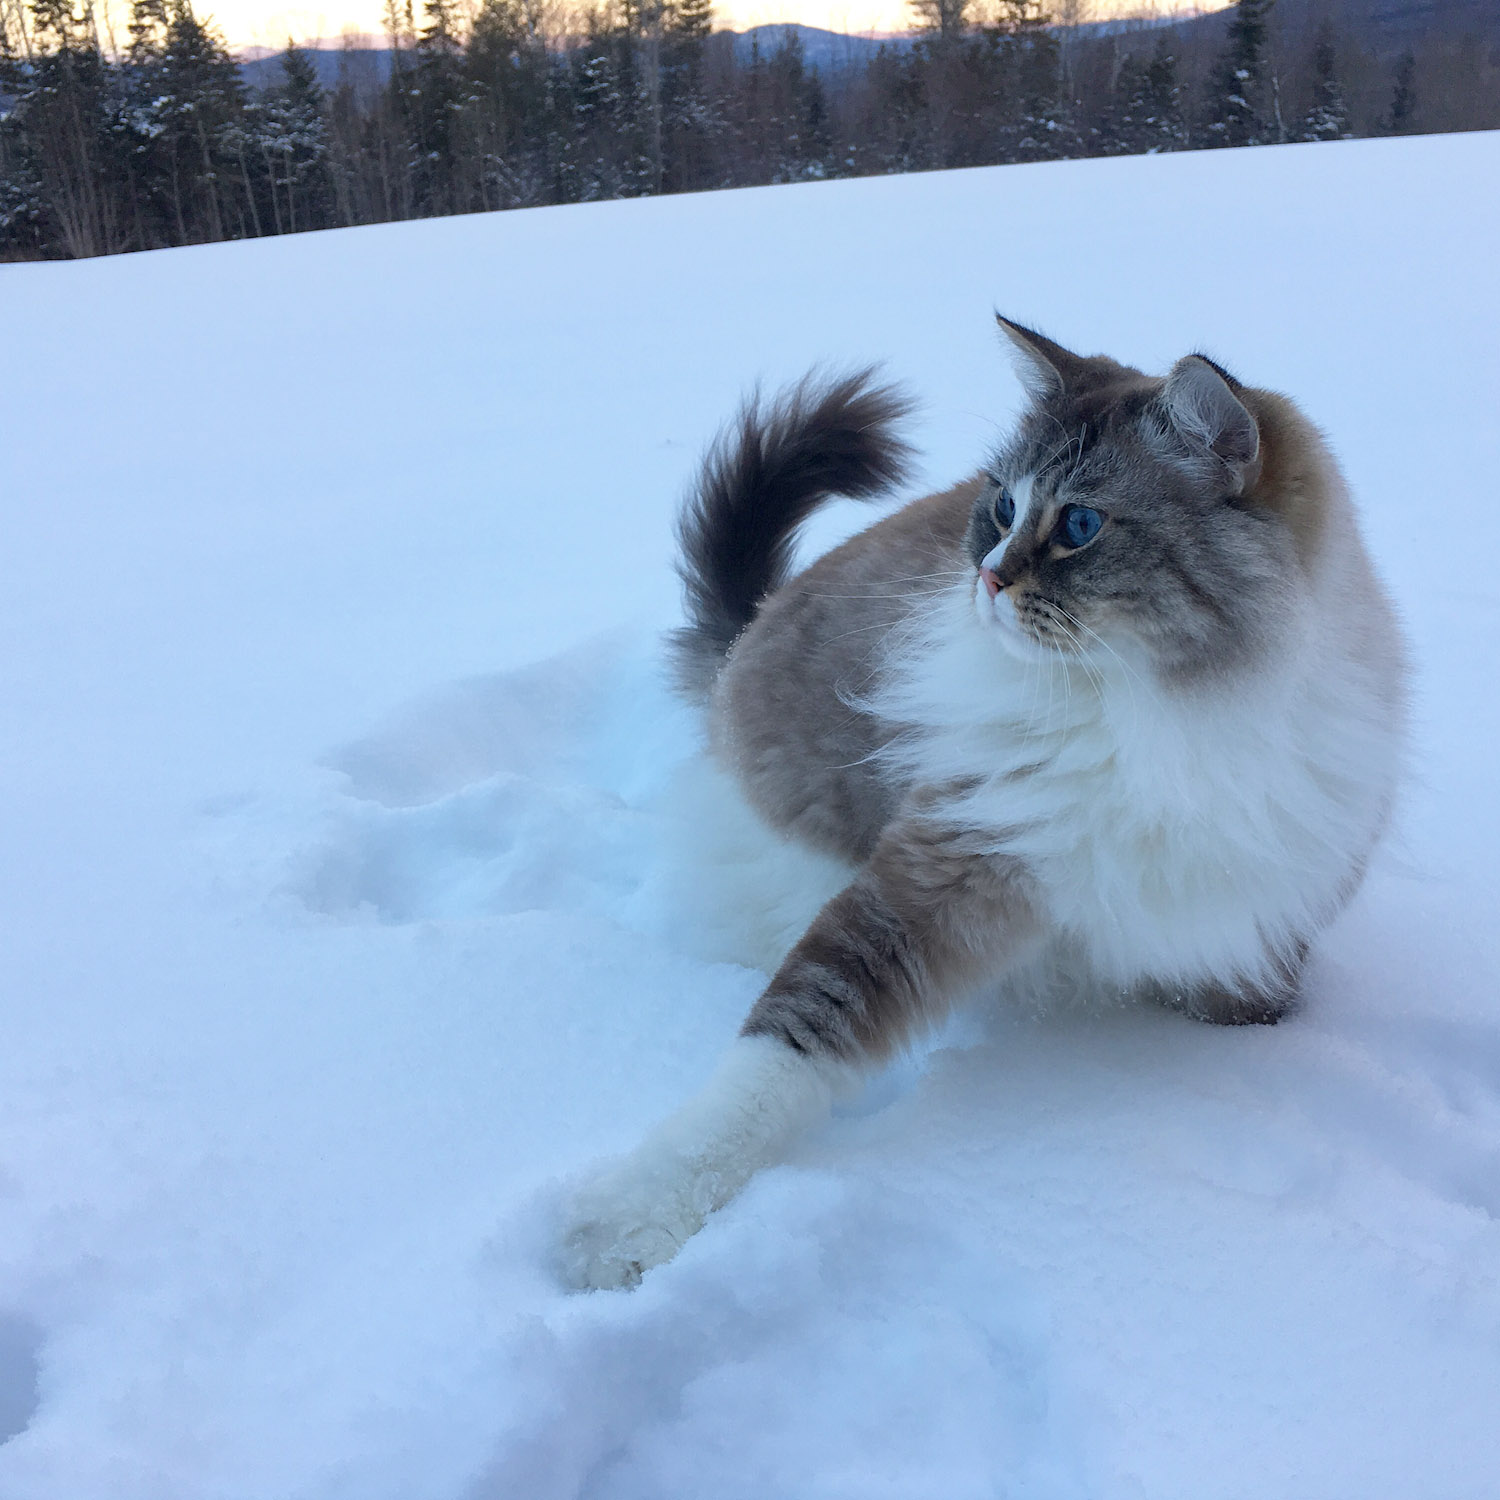 Video of Fluffy Cat Ice Skating Seen 15m Times: 'Magical Snow Kitty